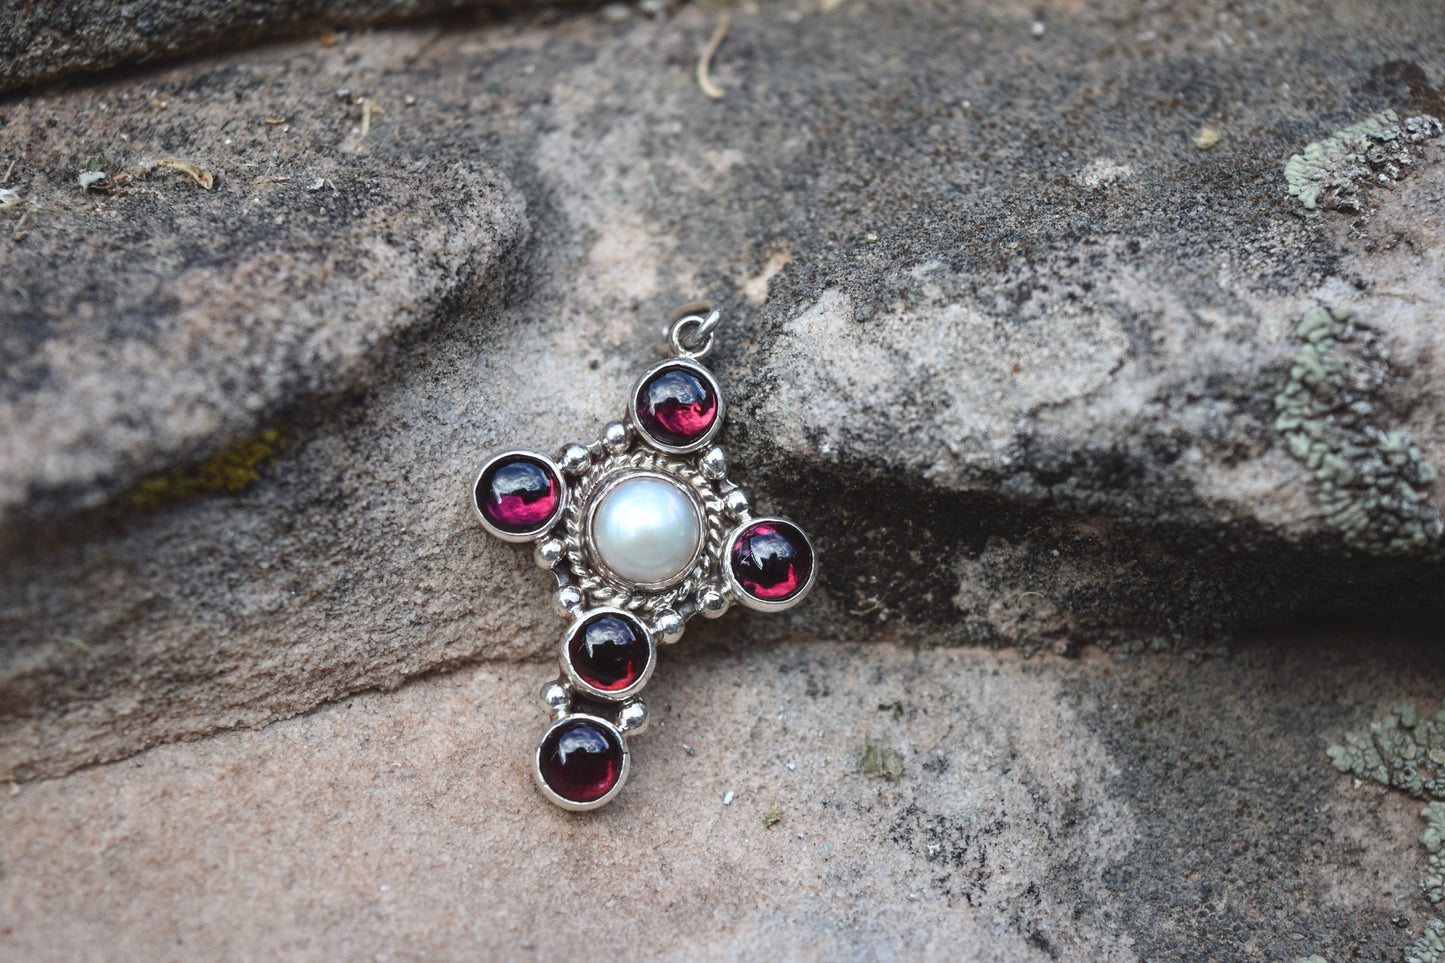 GARNET AND MOTHER OF PEARL CROSS FROM THE RODGERS COLLECTION